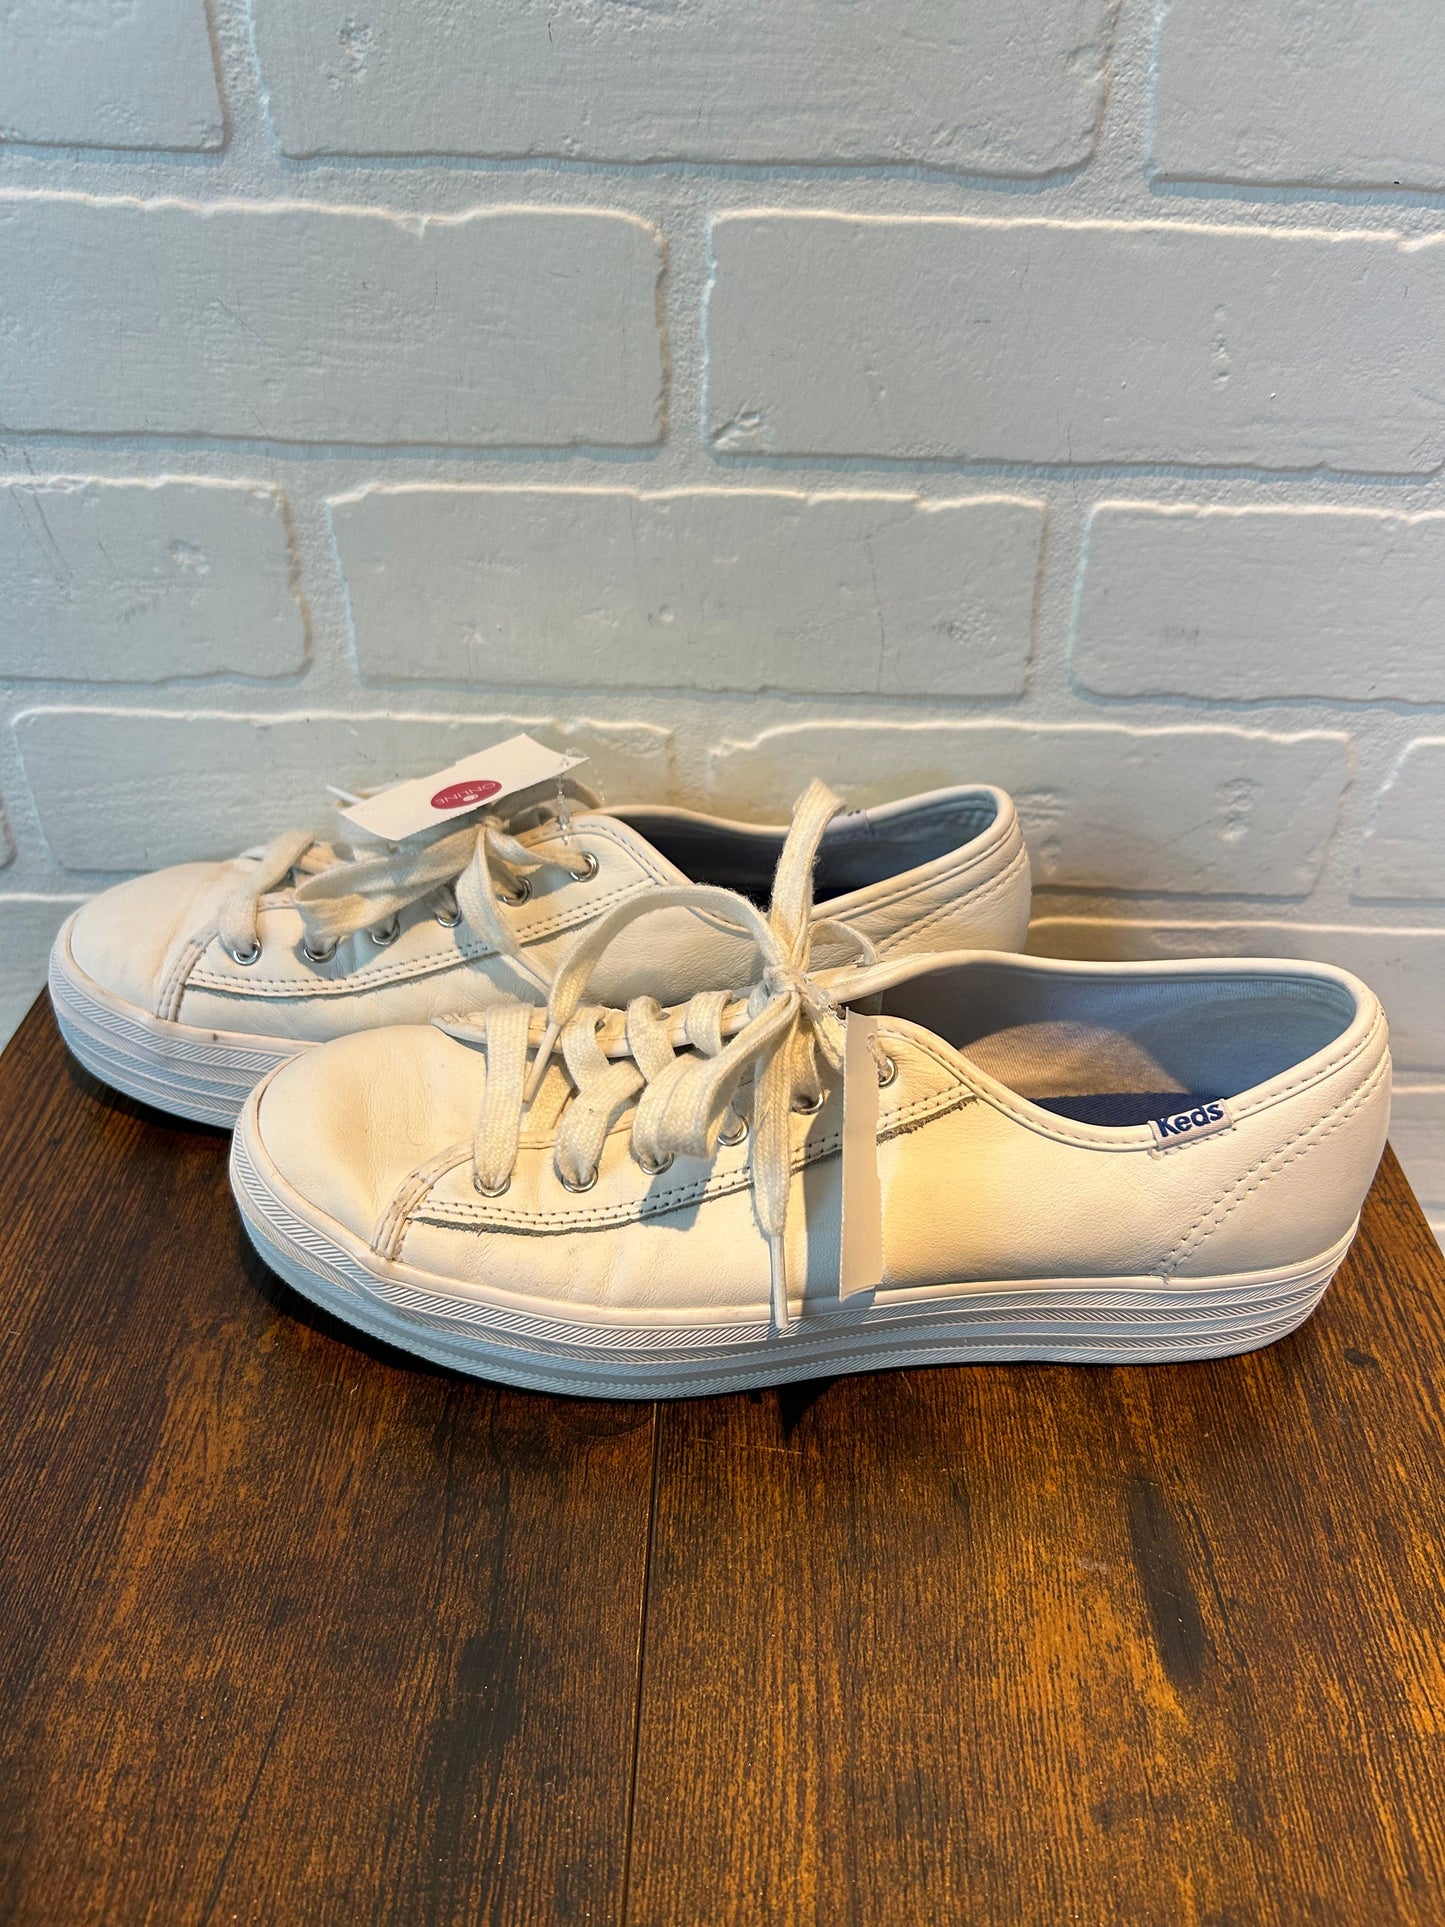 White Shoes Sneakers Keds, Size 9